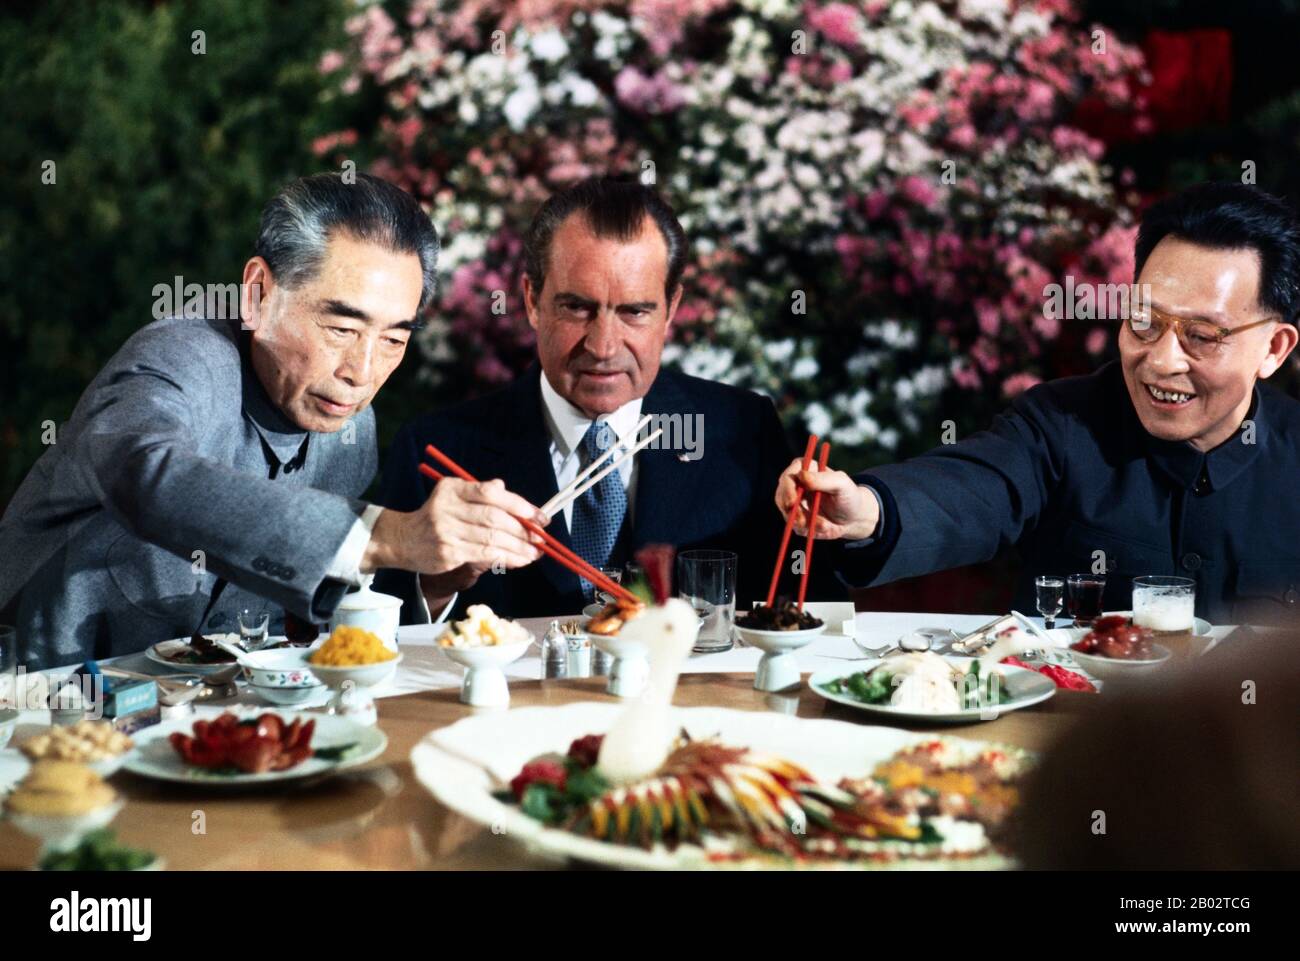 U.S. President Richard Nixon's 1972 visit to the People's Republic of China  was an important step in formally normalizing relations between the United  States and the People's Republic of China. Between February